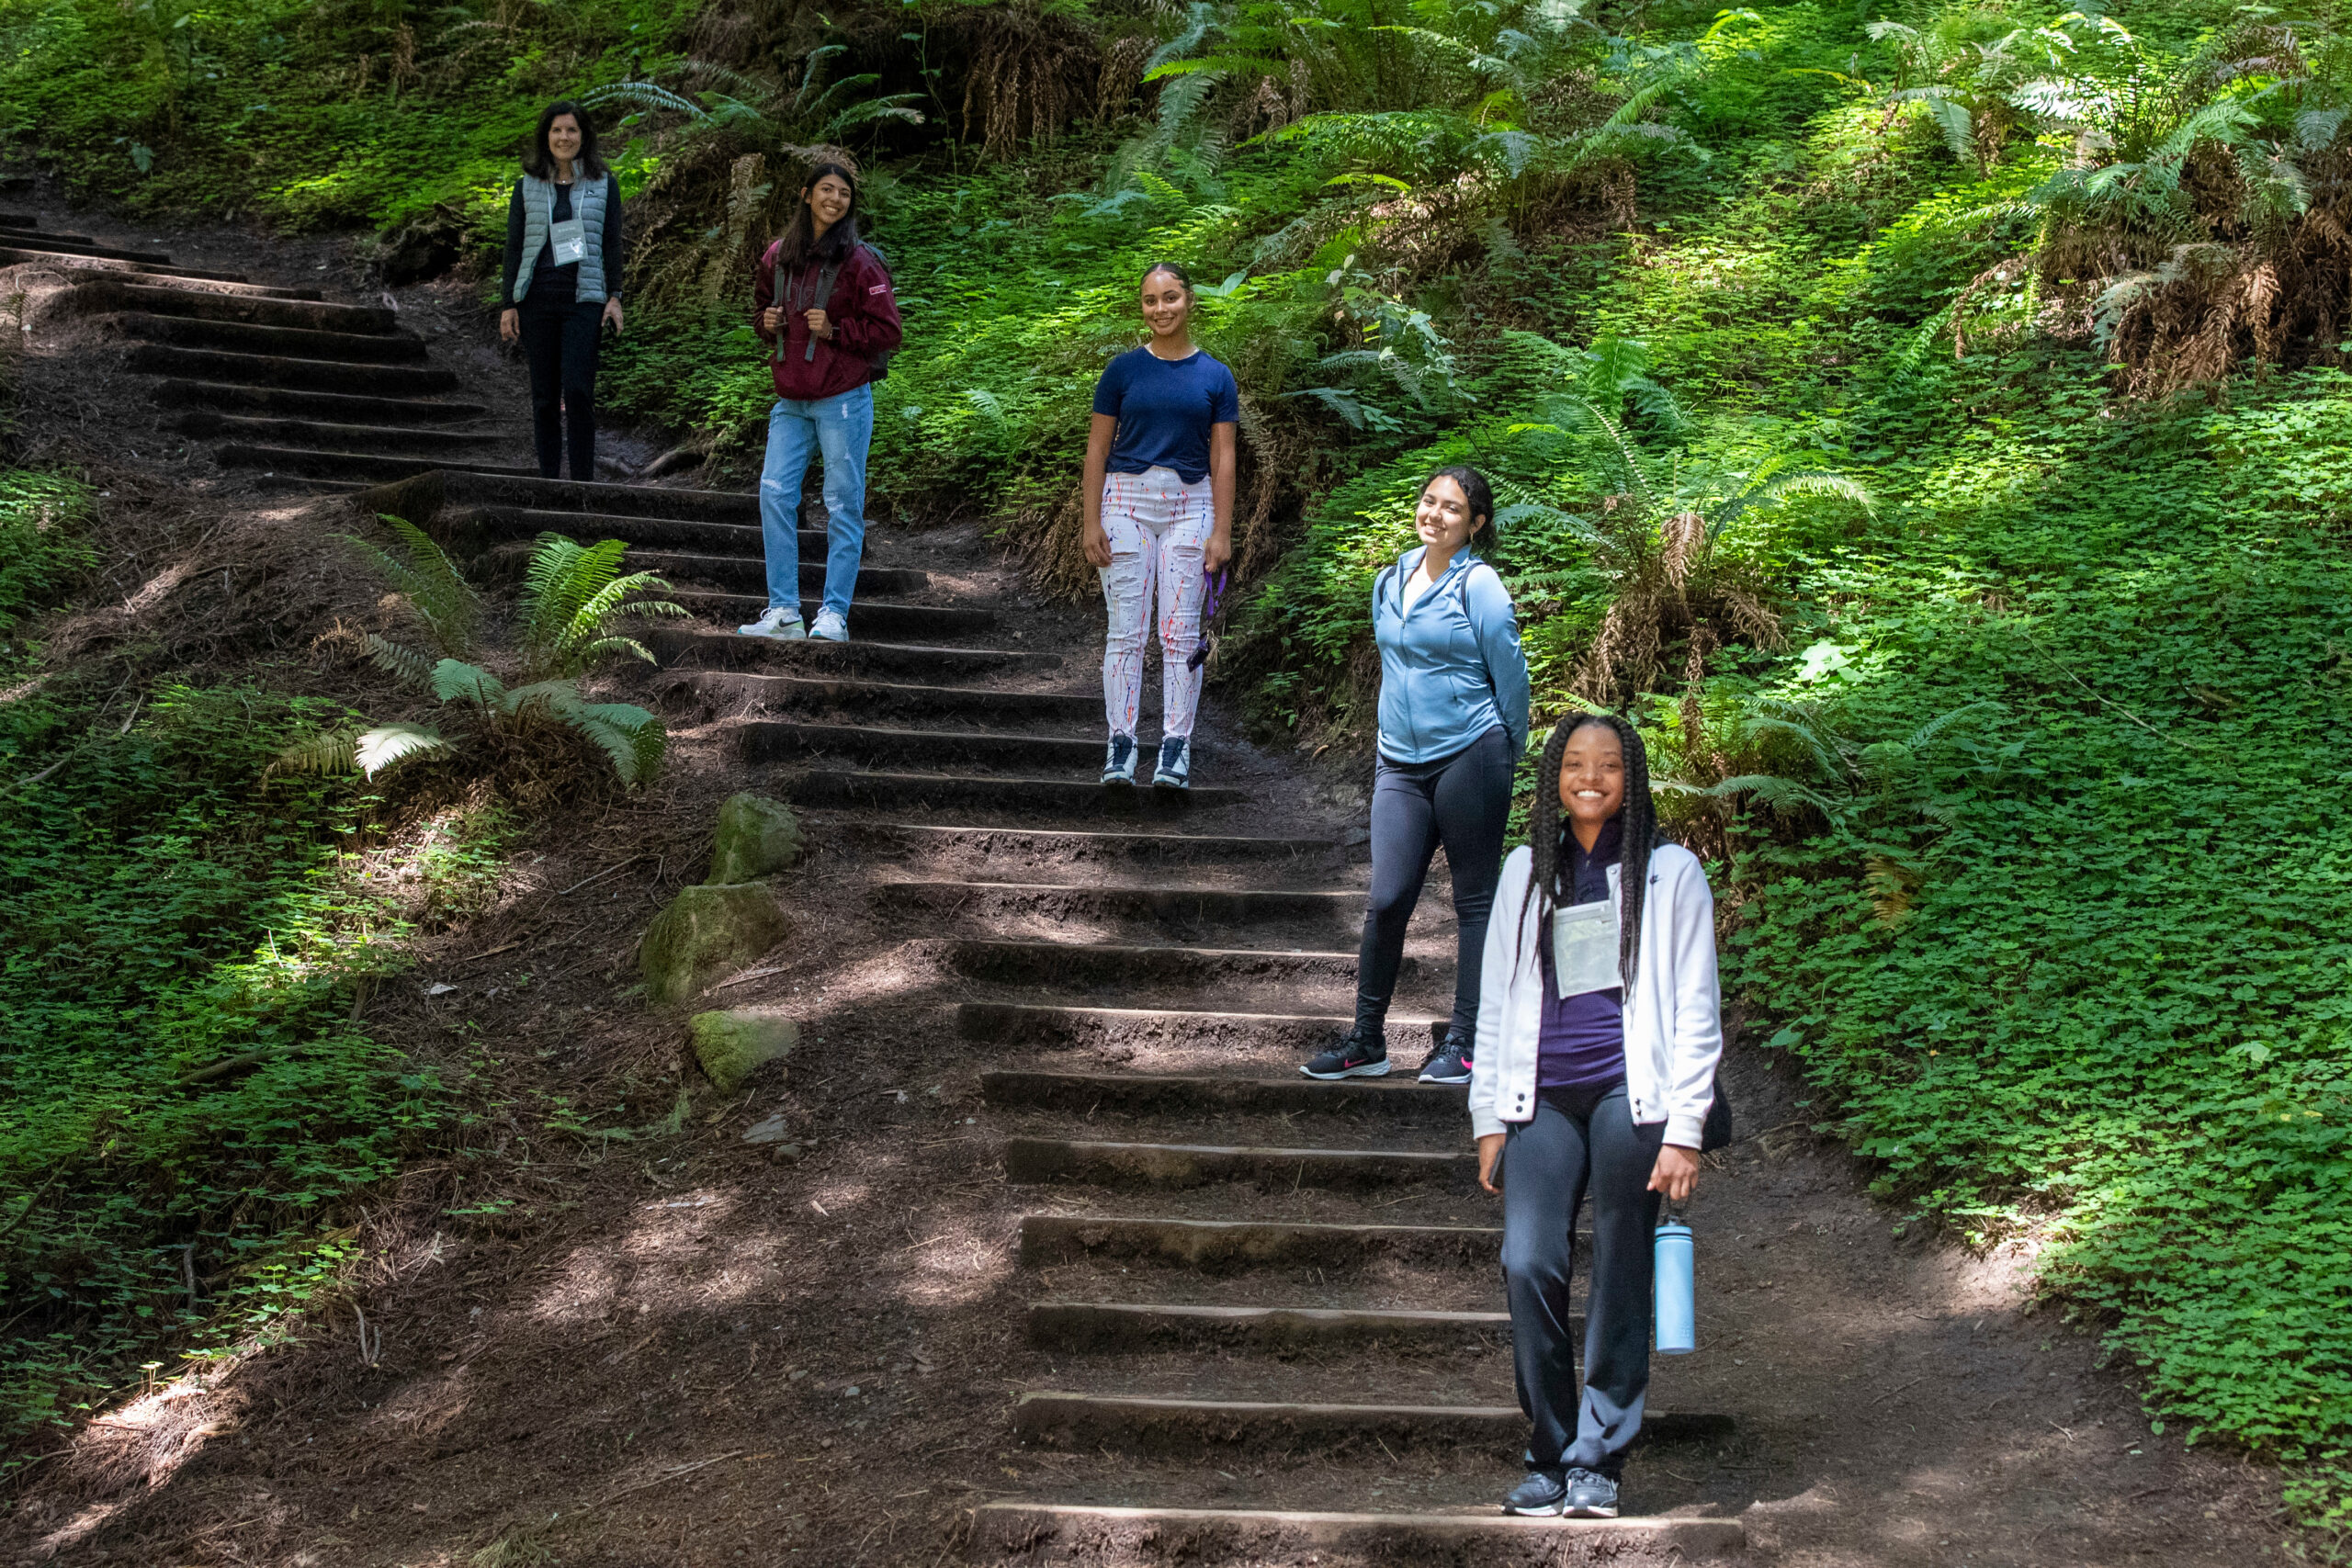 Group of participants posing on steps in a forest.